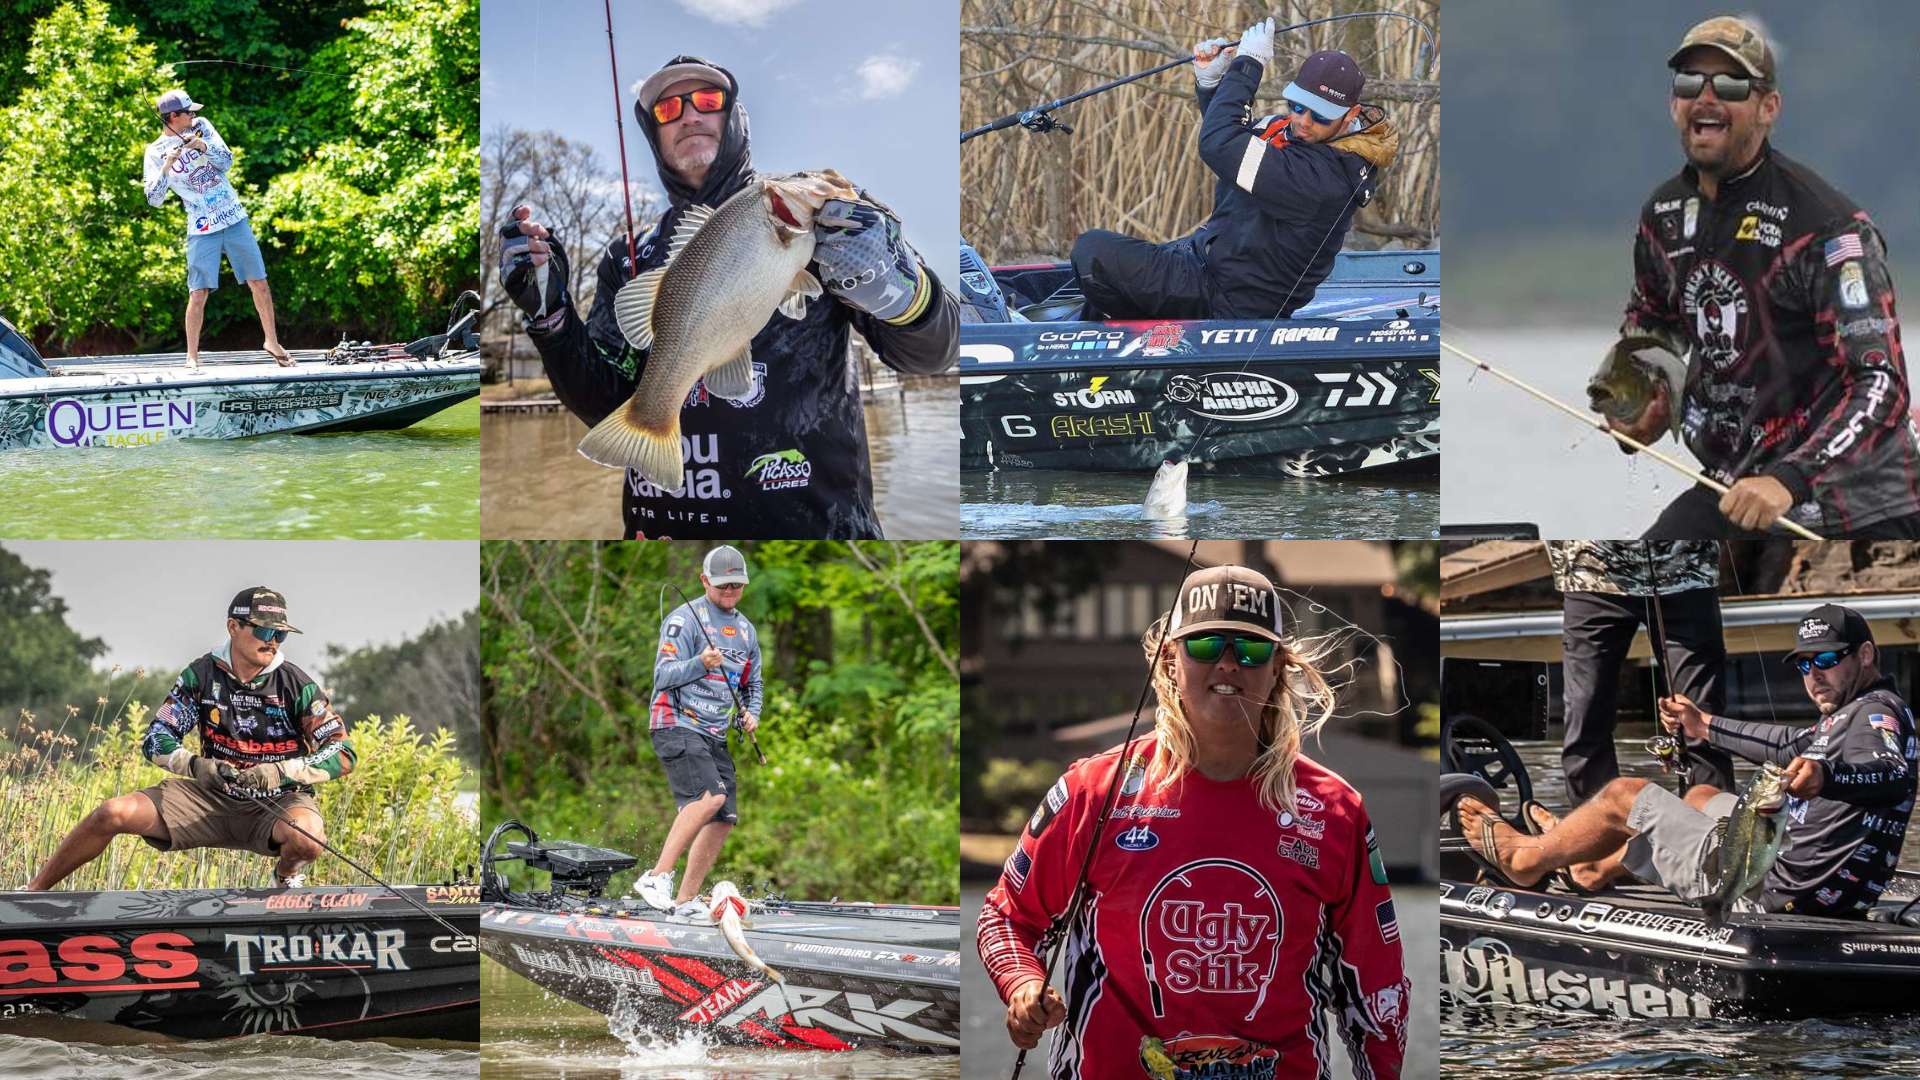 Here's a look at who is in the 2022 Academy Sports + Outdoors Bassmaster Classic presented by Huk. This year the Classic will take place in Greenville, South Carolina, on Lake Hartwell, March 4 - 6.